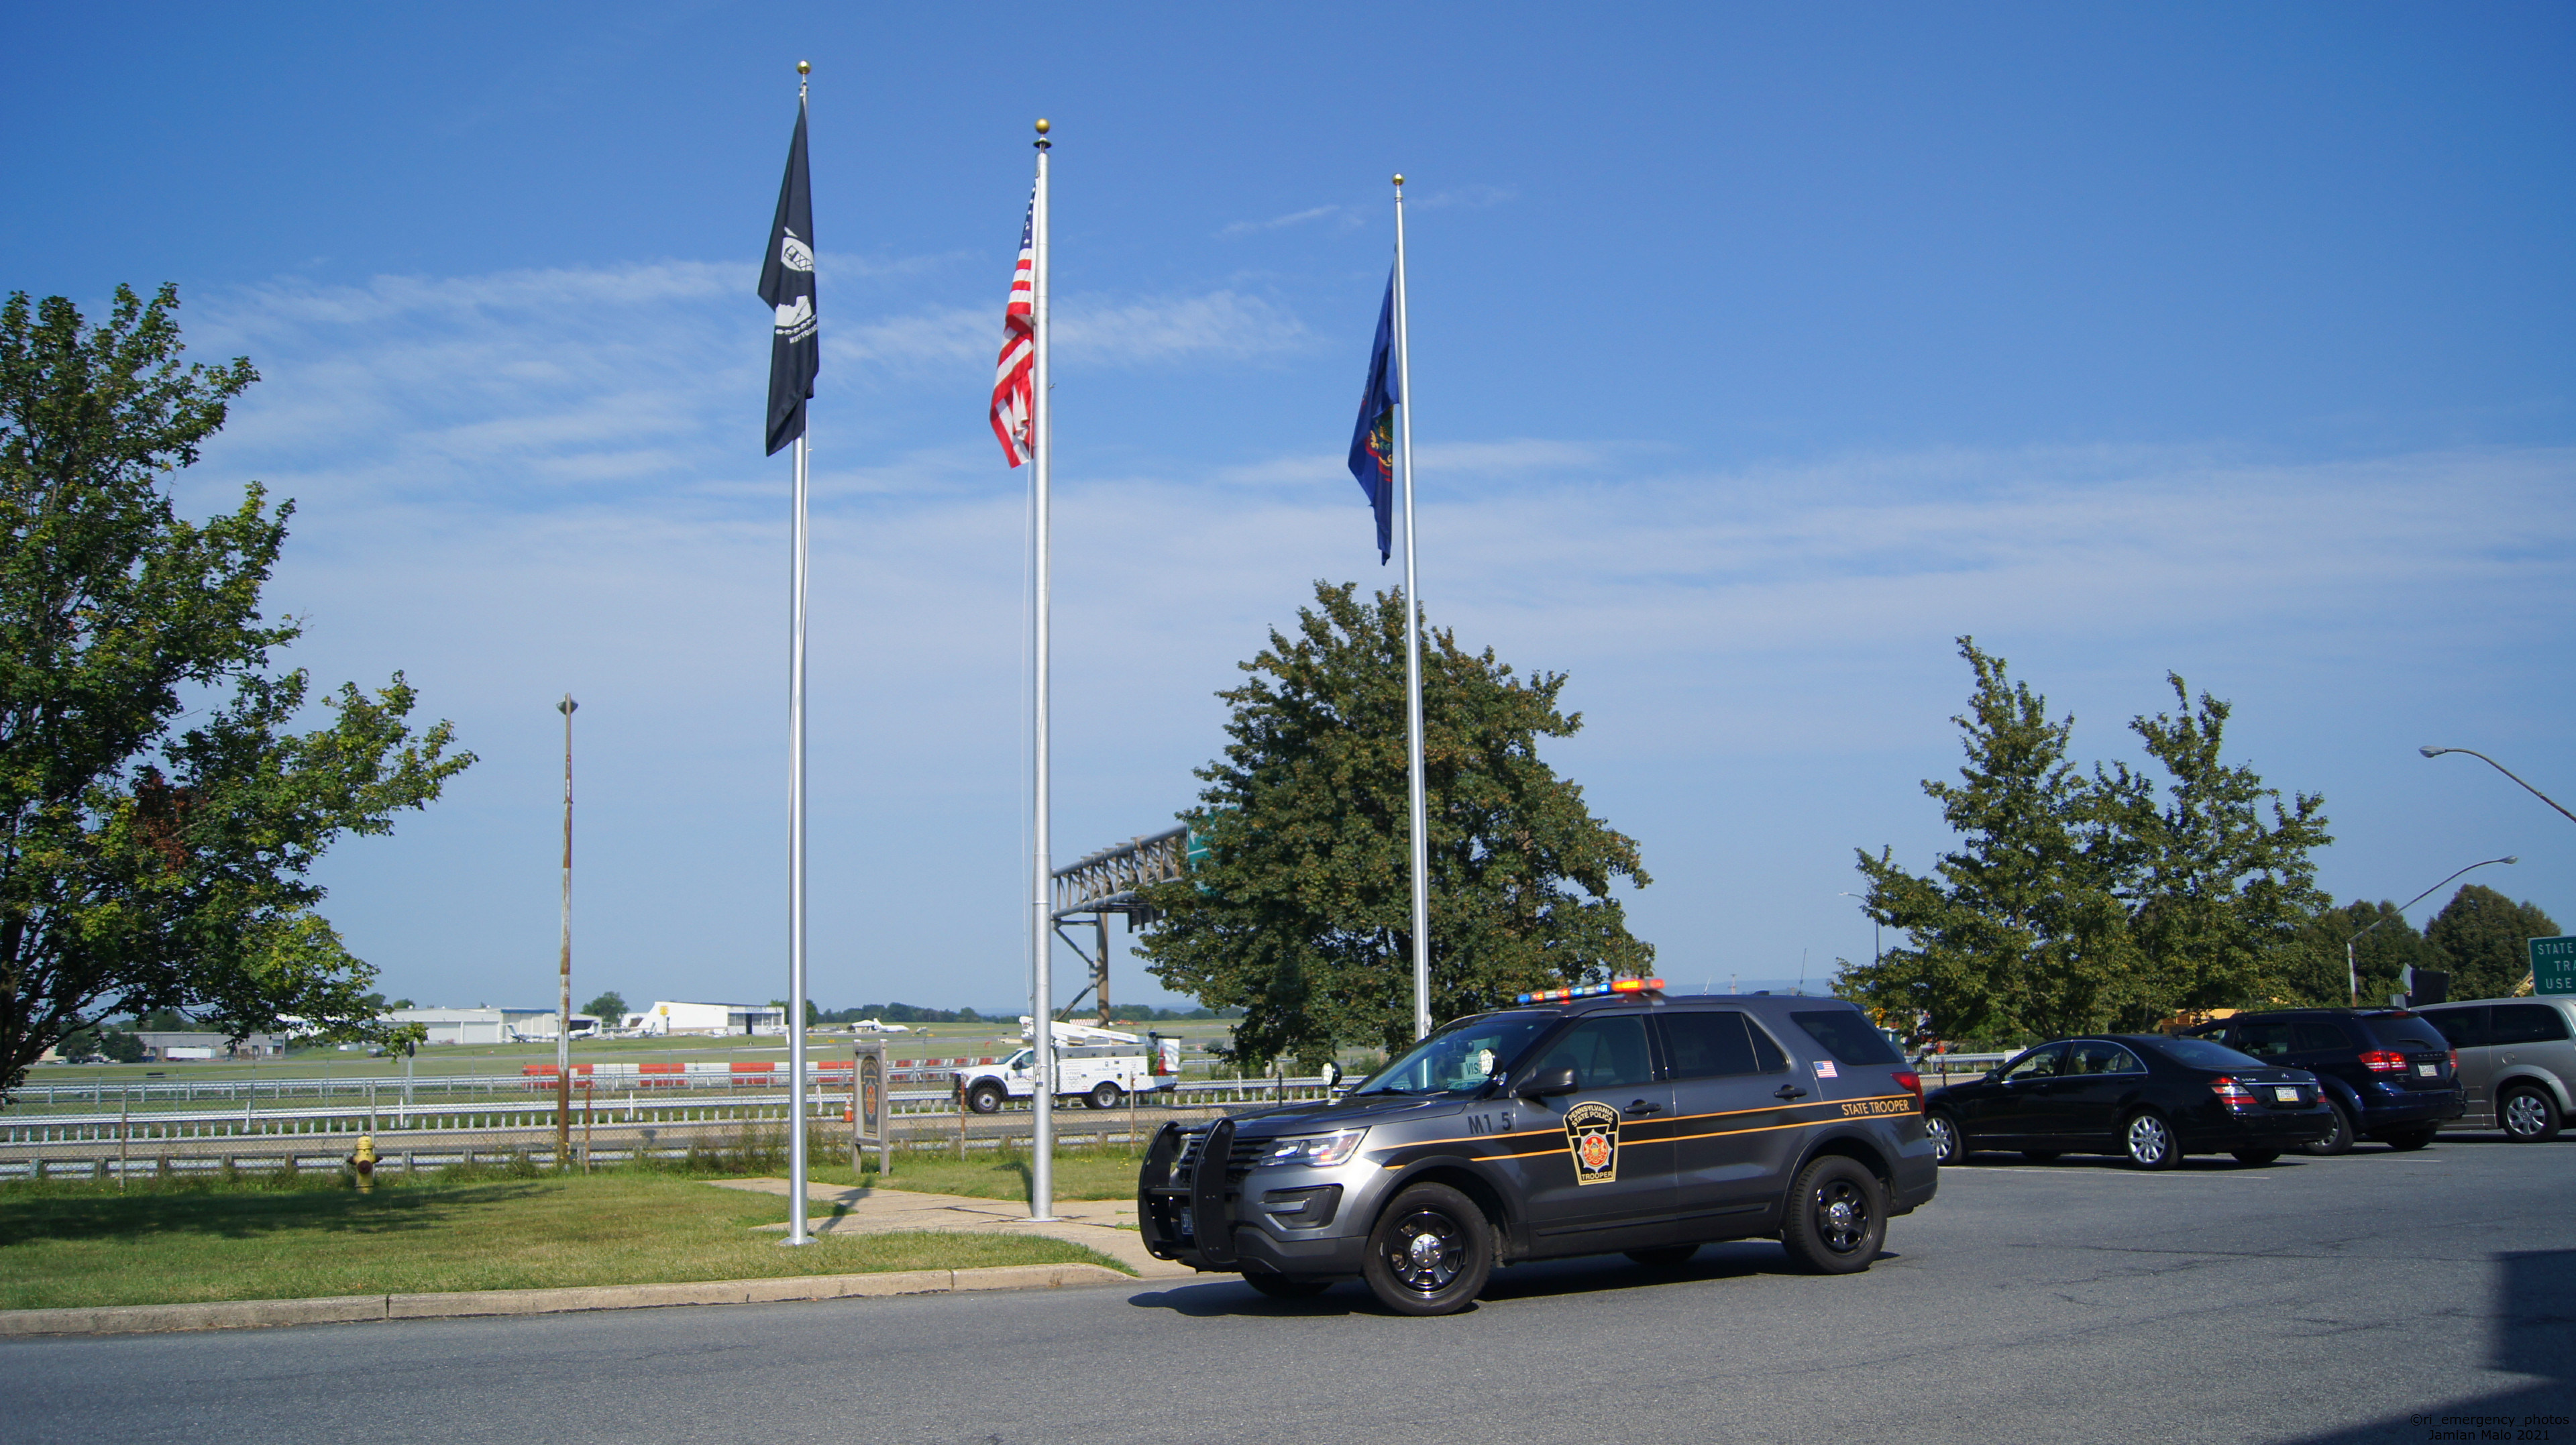 A photo  of Pennsylvania State Police
            Cruiser M1 5, a 2016-2019 Ford Police Interceptor Utility             taken by Jamian Malo